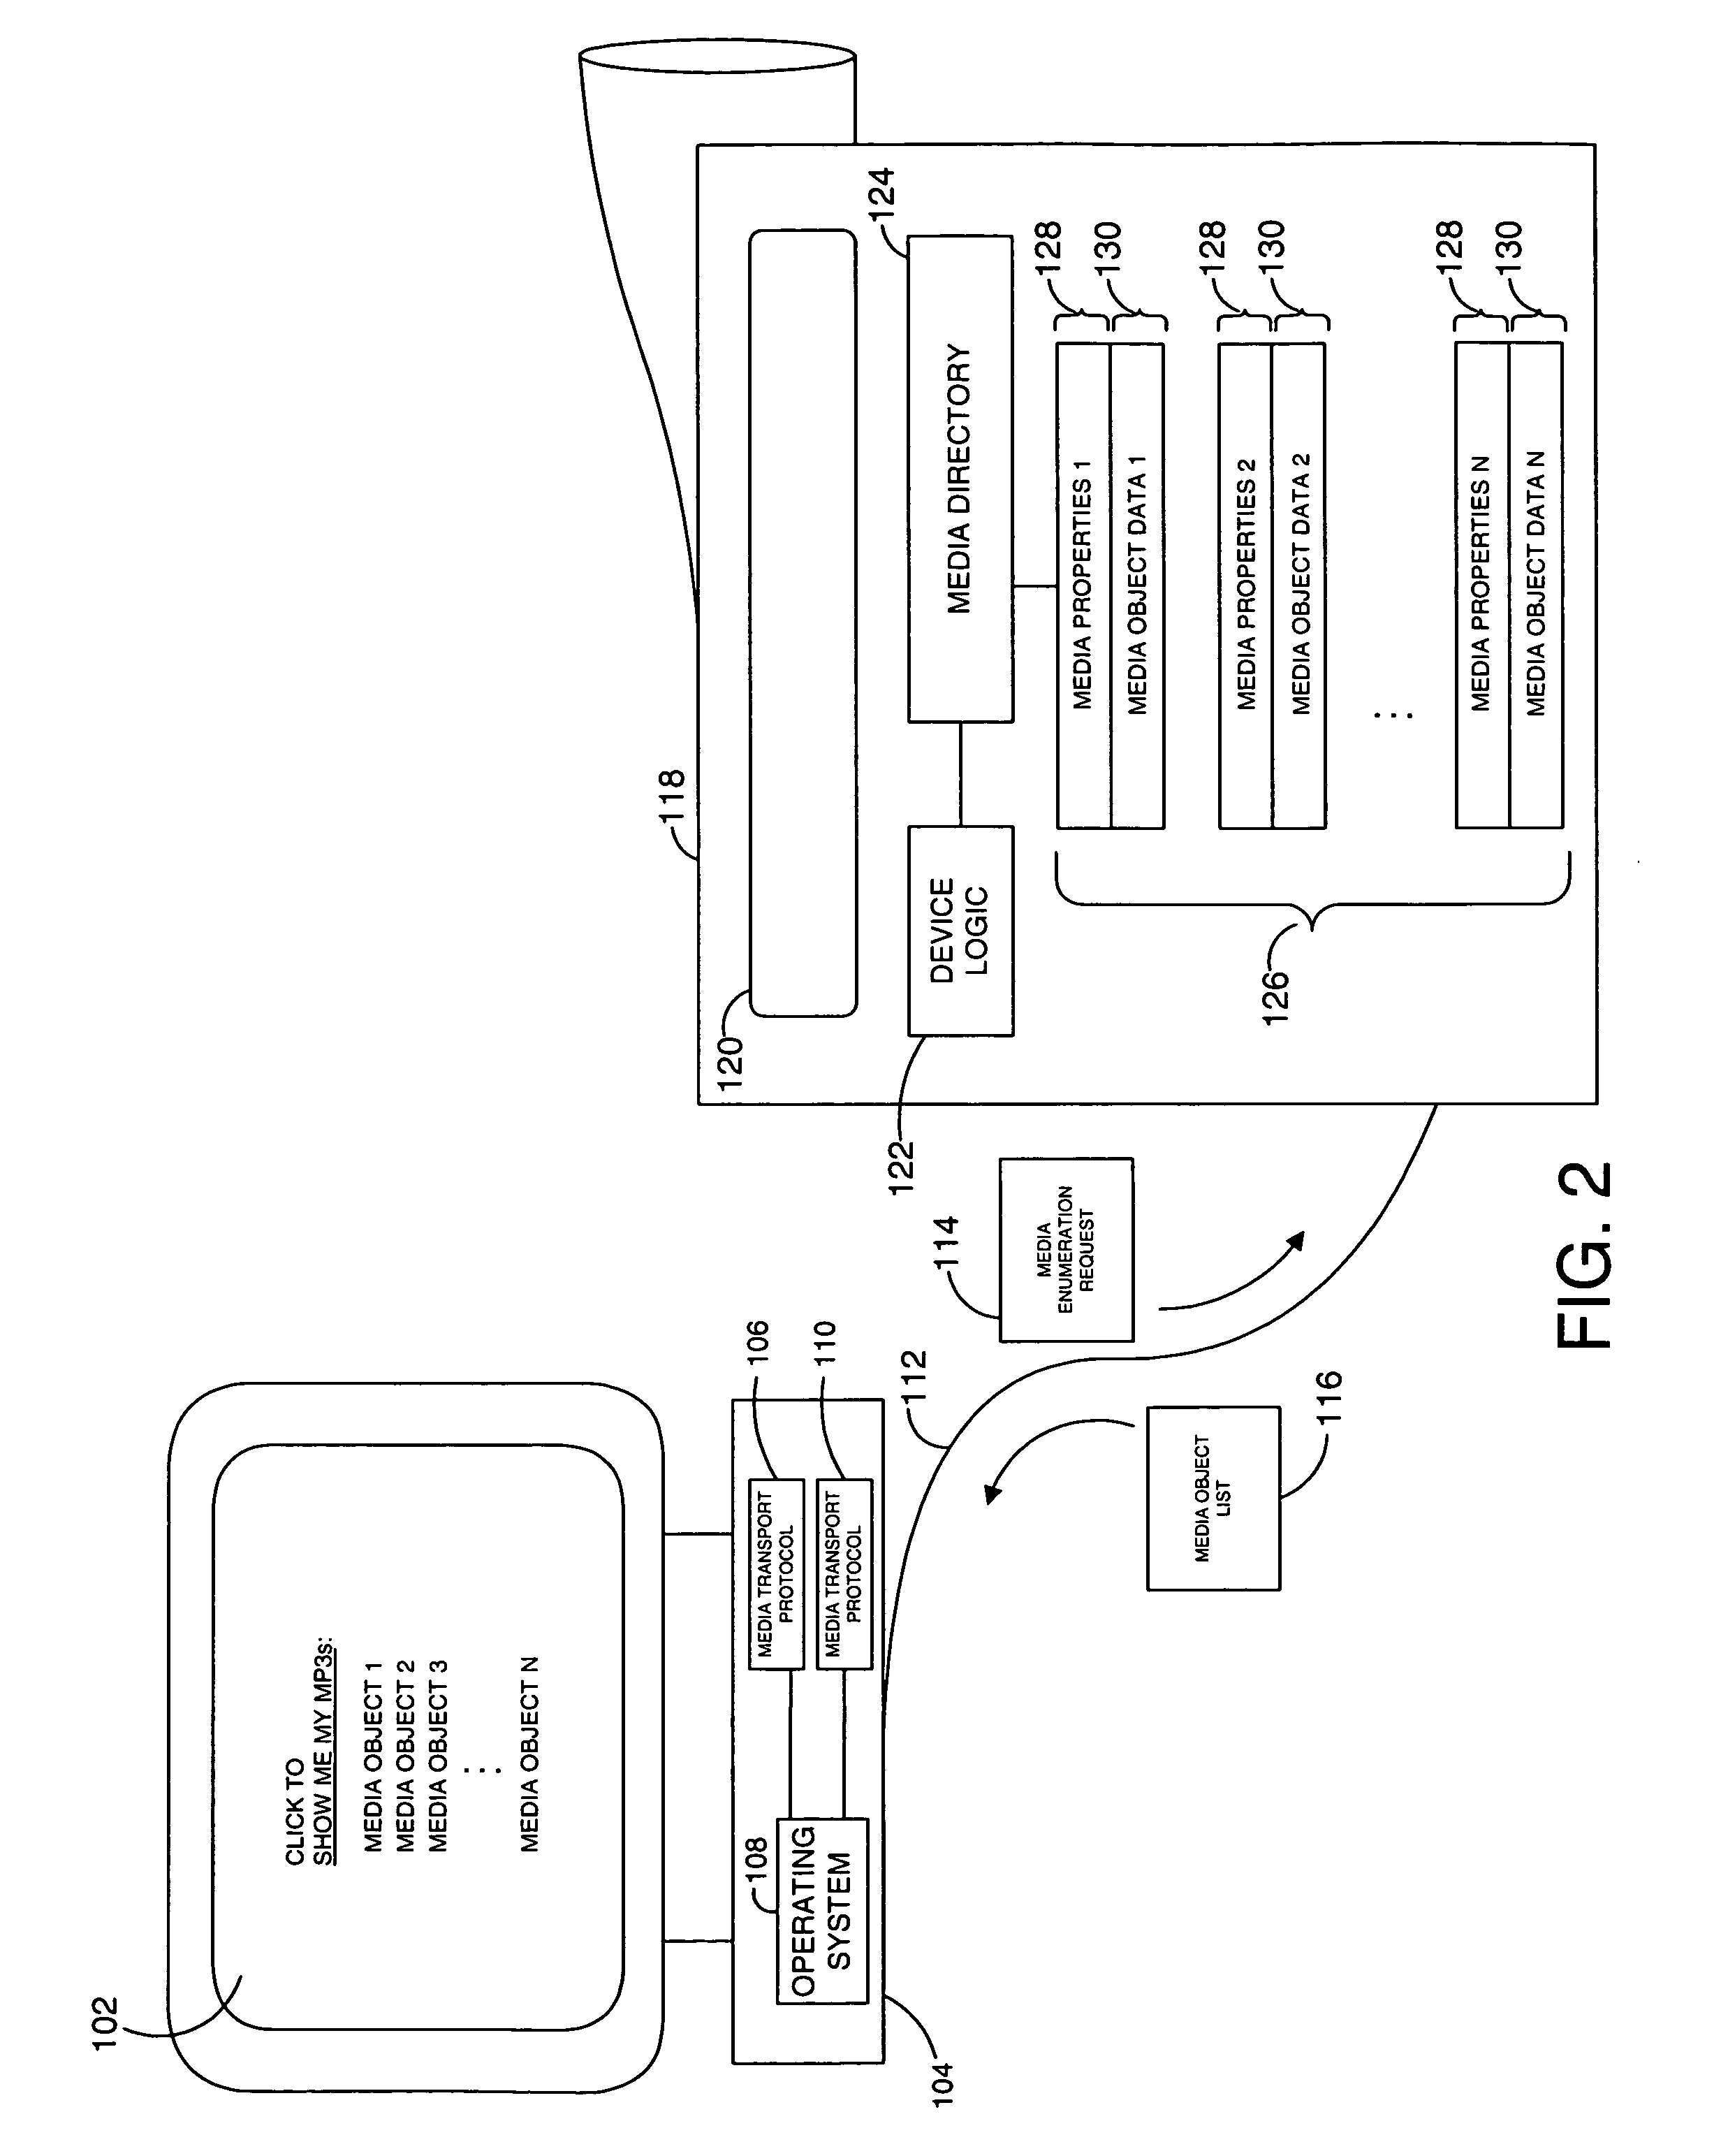 System and method for encapsulation of representative sample of media object